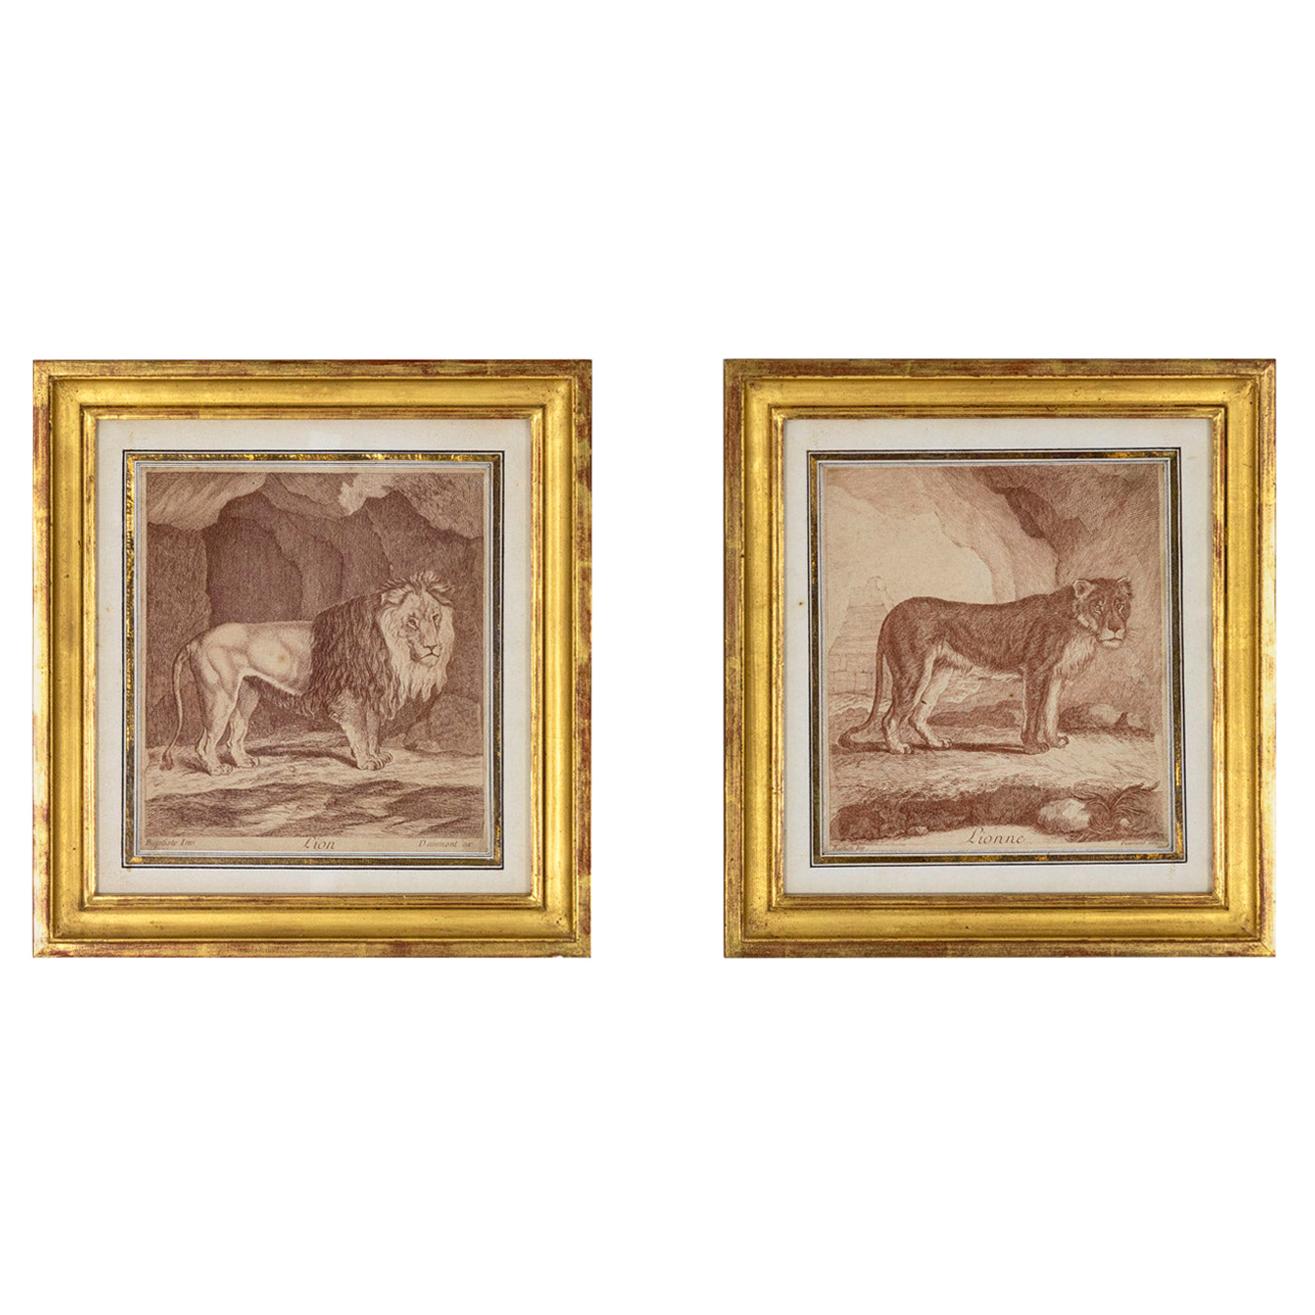 Pair of Engravings Figuring a Lion and a Lioness, 19th Century